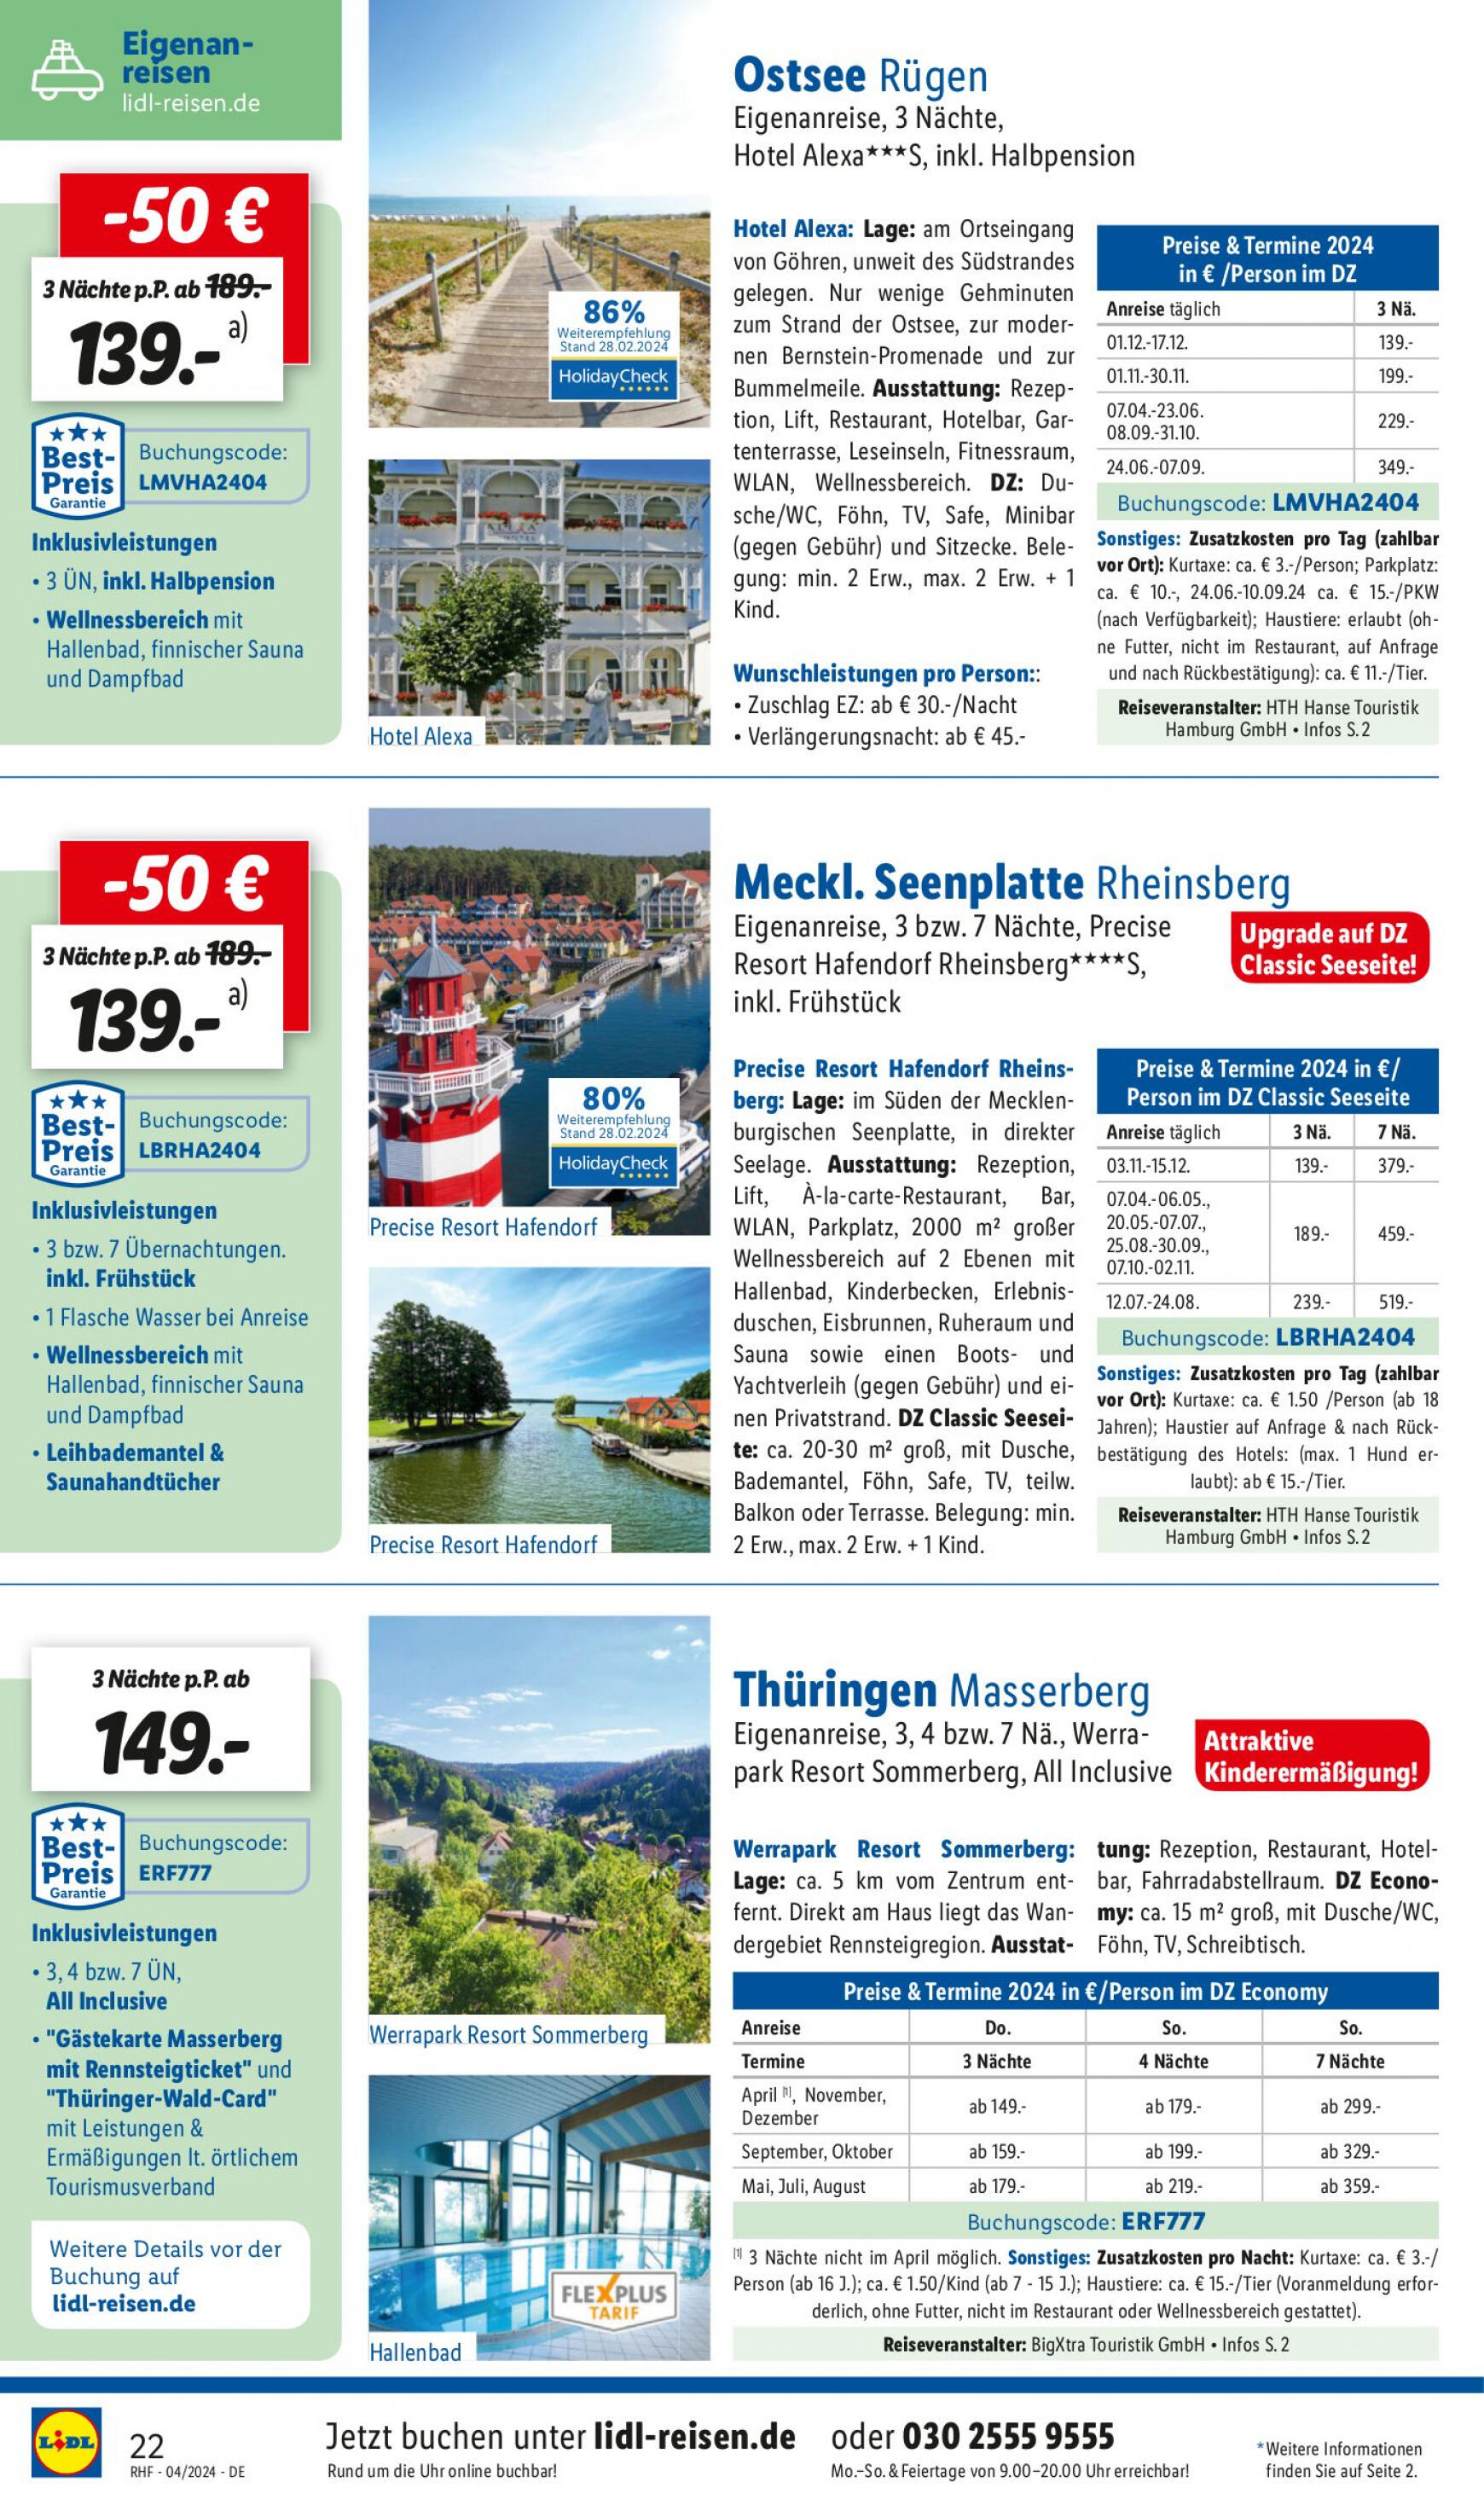 lidl - Flyer Lidl - April Reise-Highlights aktuell 27.03. - 30.04. - page: 22